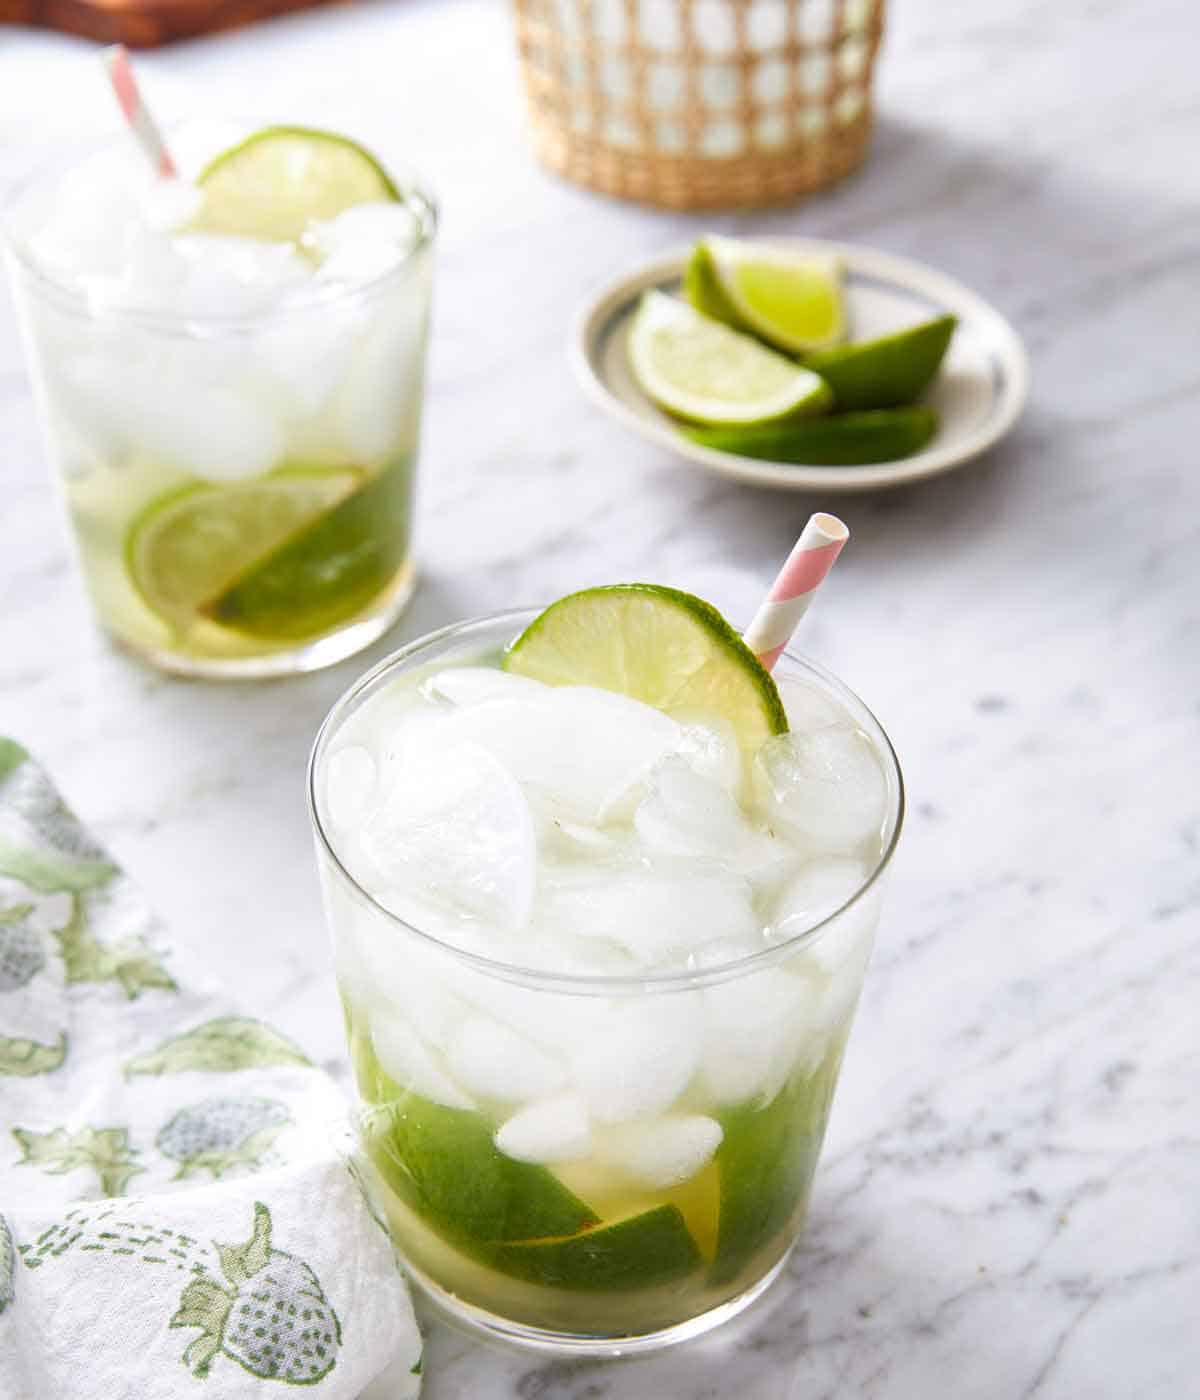 Two glasses of caipirinha with a small plate of cut limes in the background.